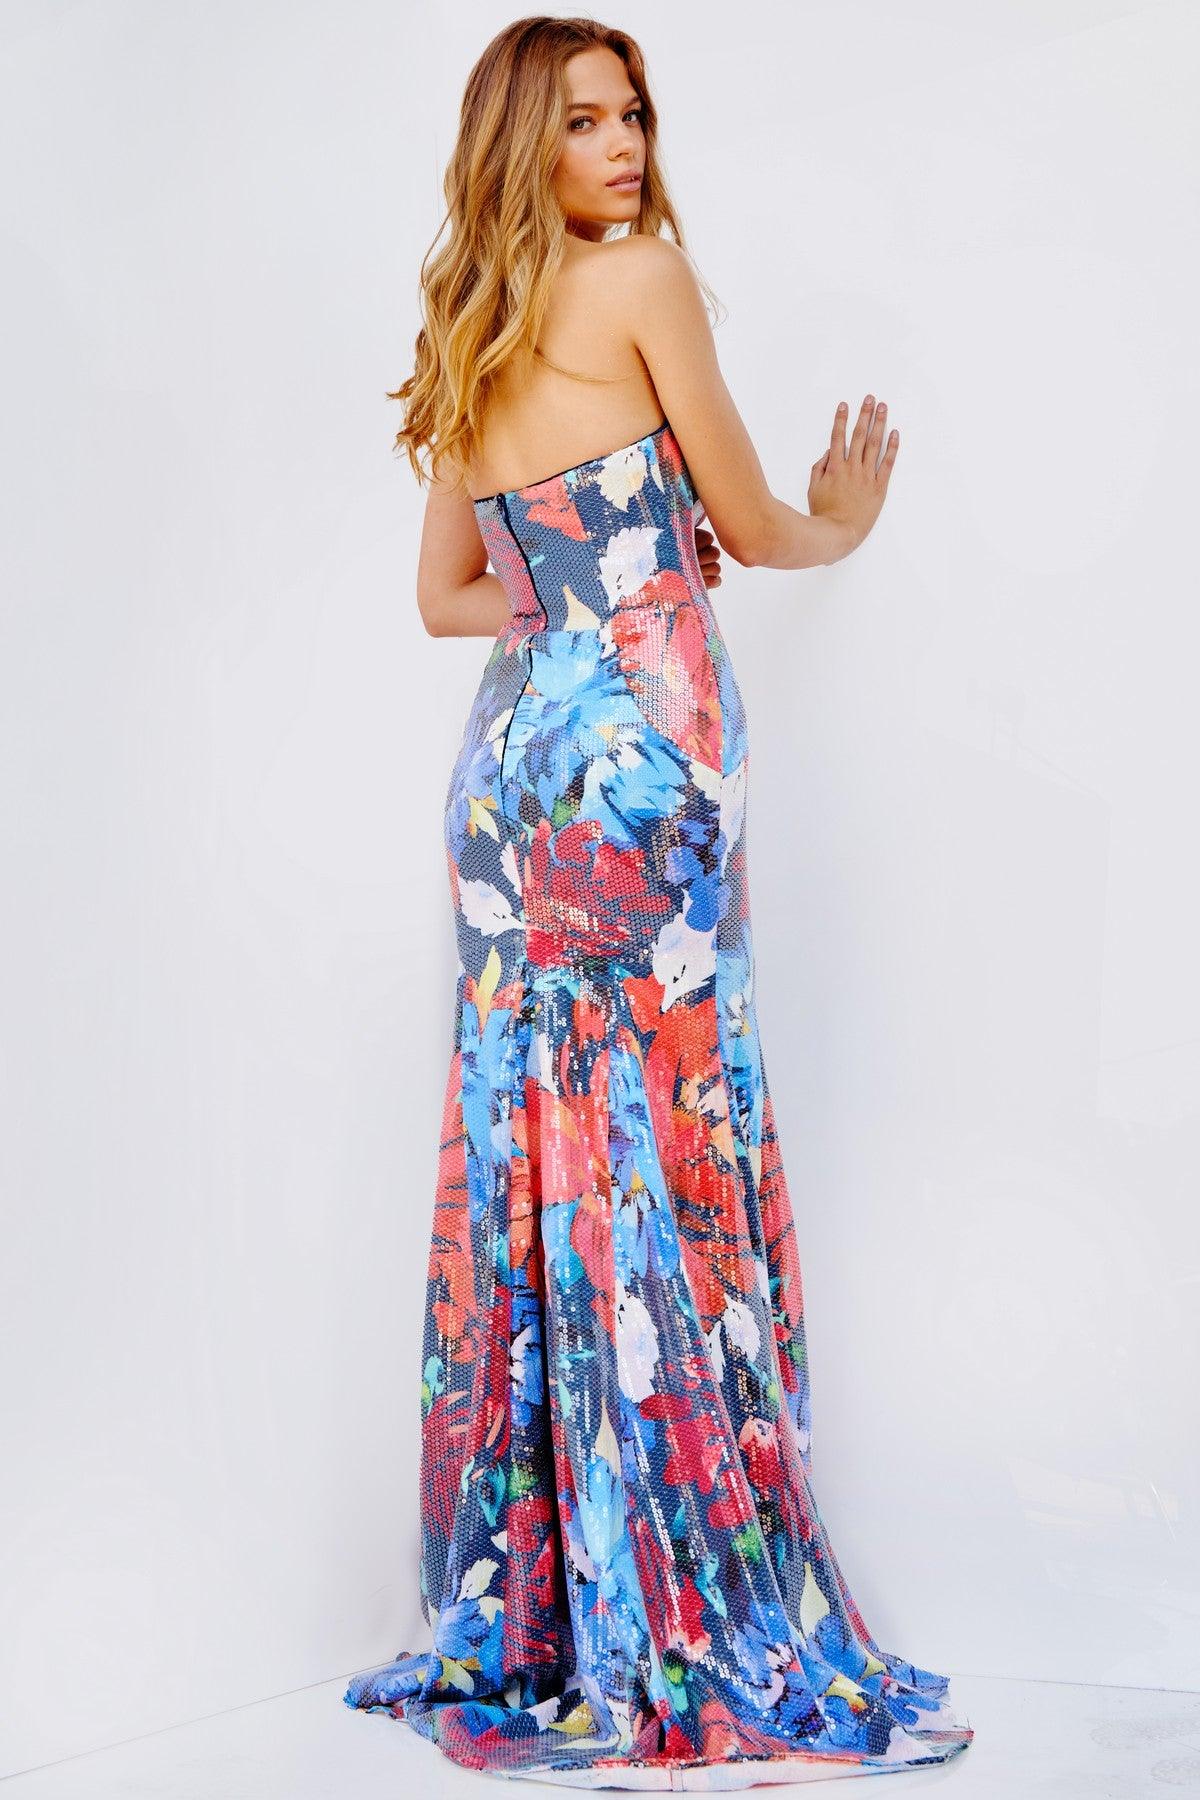 Prom Dresses Long Strapless Floral Print Prom Gown Multi